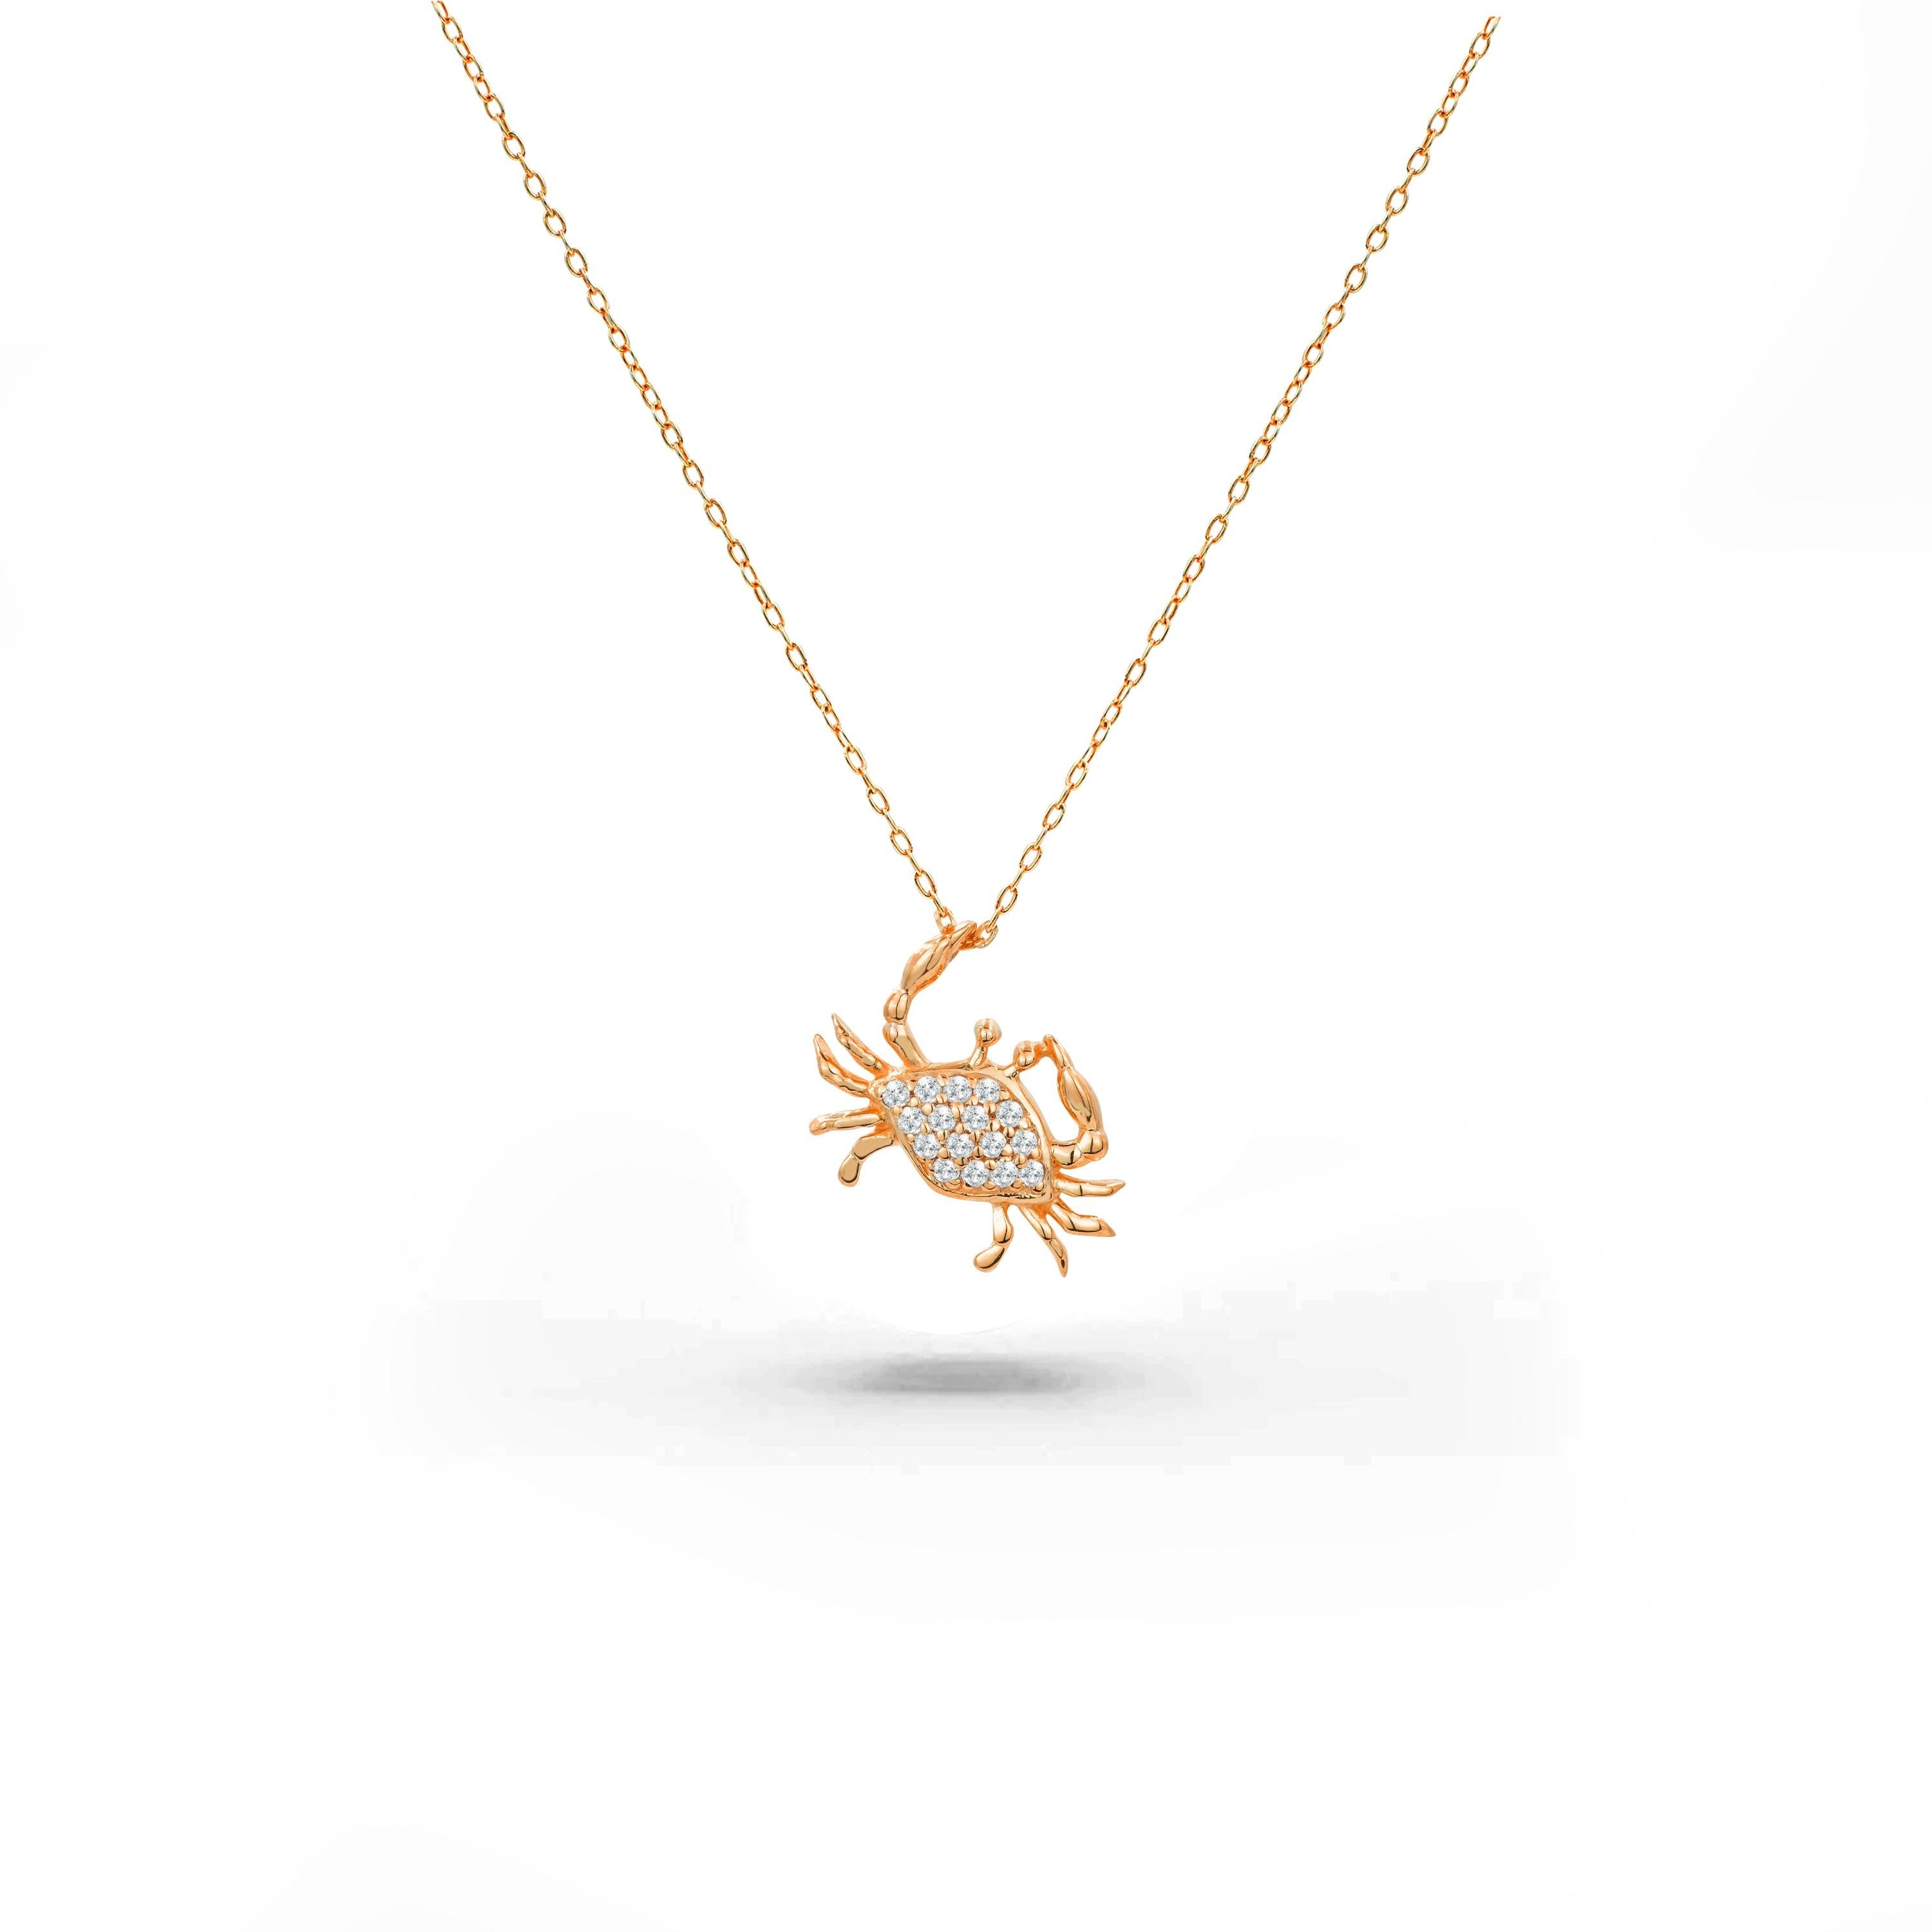 Diamond Crab Pendant Necklace in 18k Yellow Gold / White Gold / Rose Gold.

Delicate dainty crab charm necklace with natural diamond set in 18k solid gold available in three colors. Natural genuine round cut diamond each diamond is hand selected by